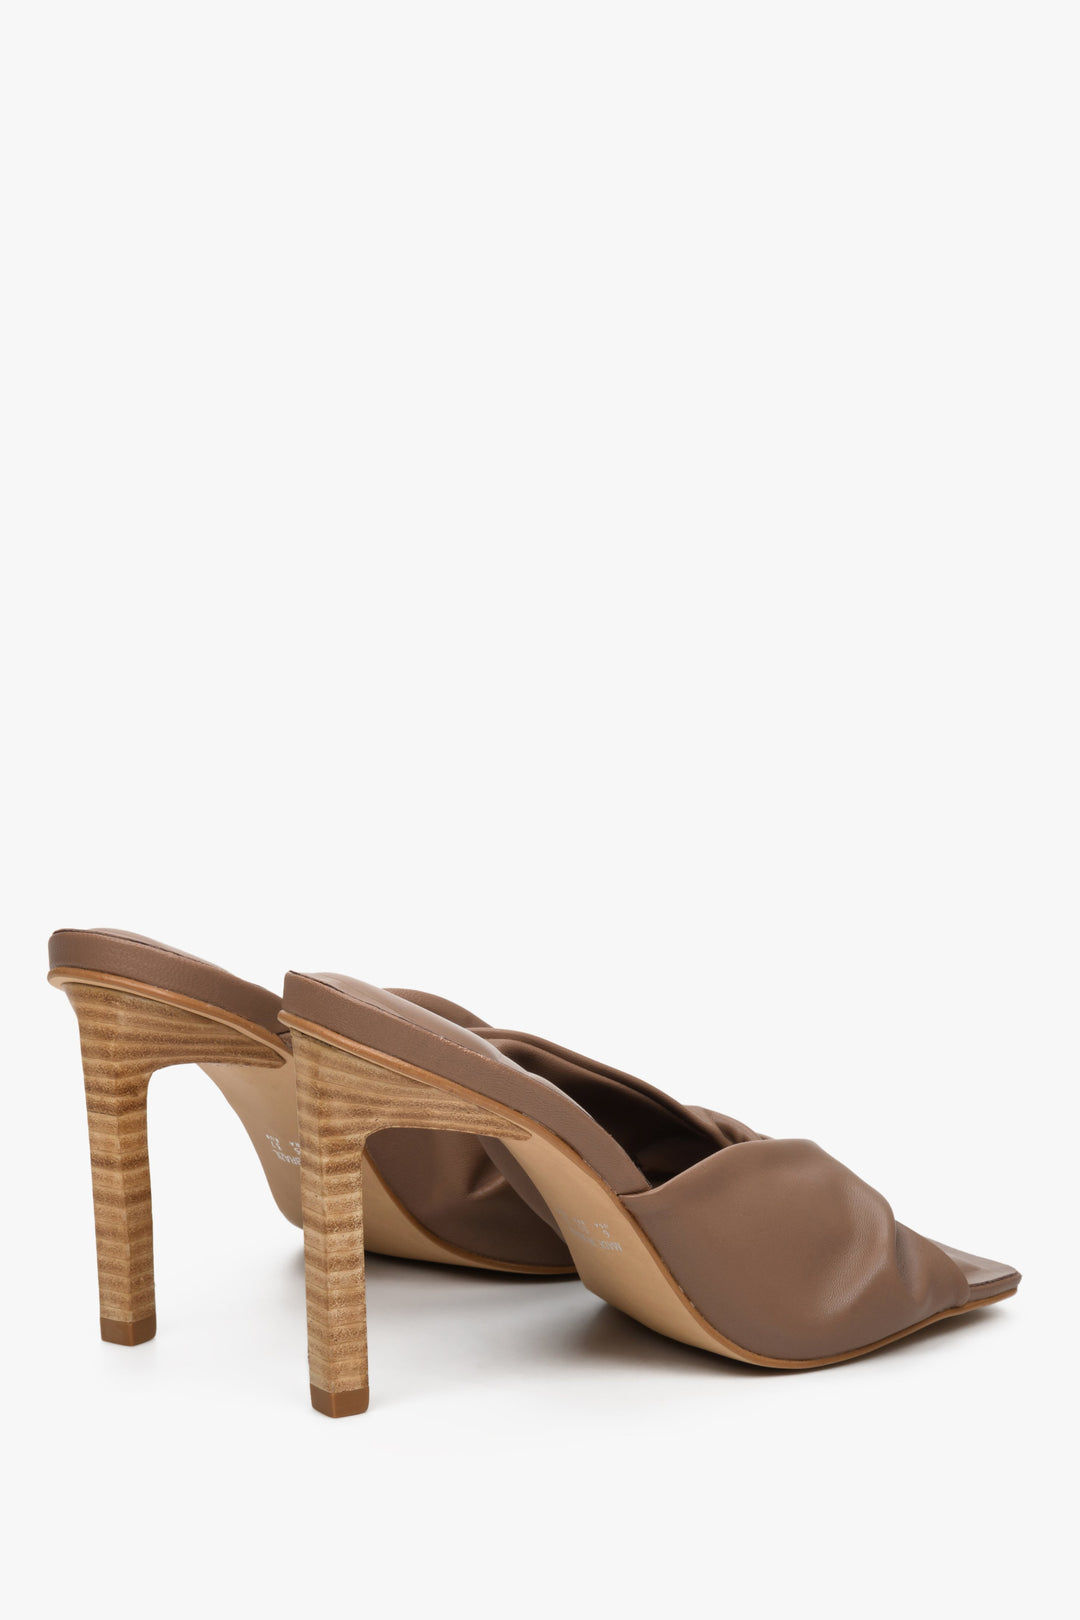 Women's brown leather high heel mules by Estro - close-up on the back of the shoes and the heel.